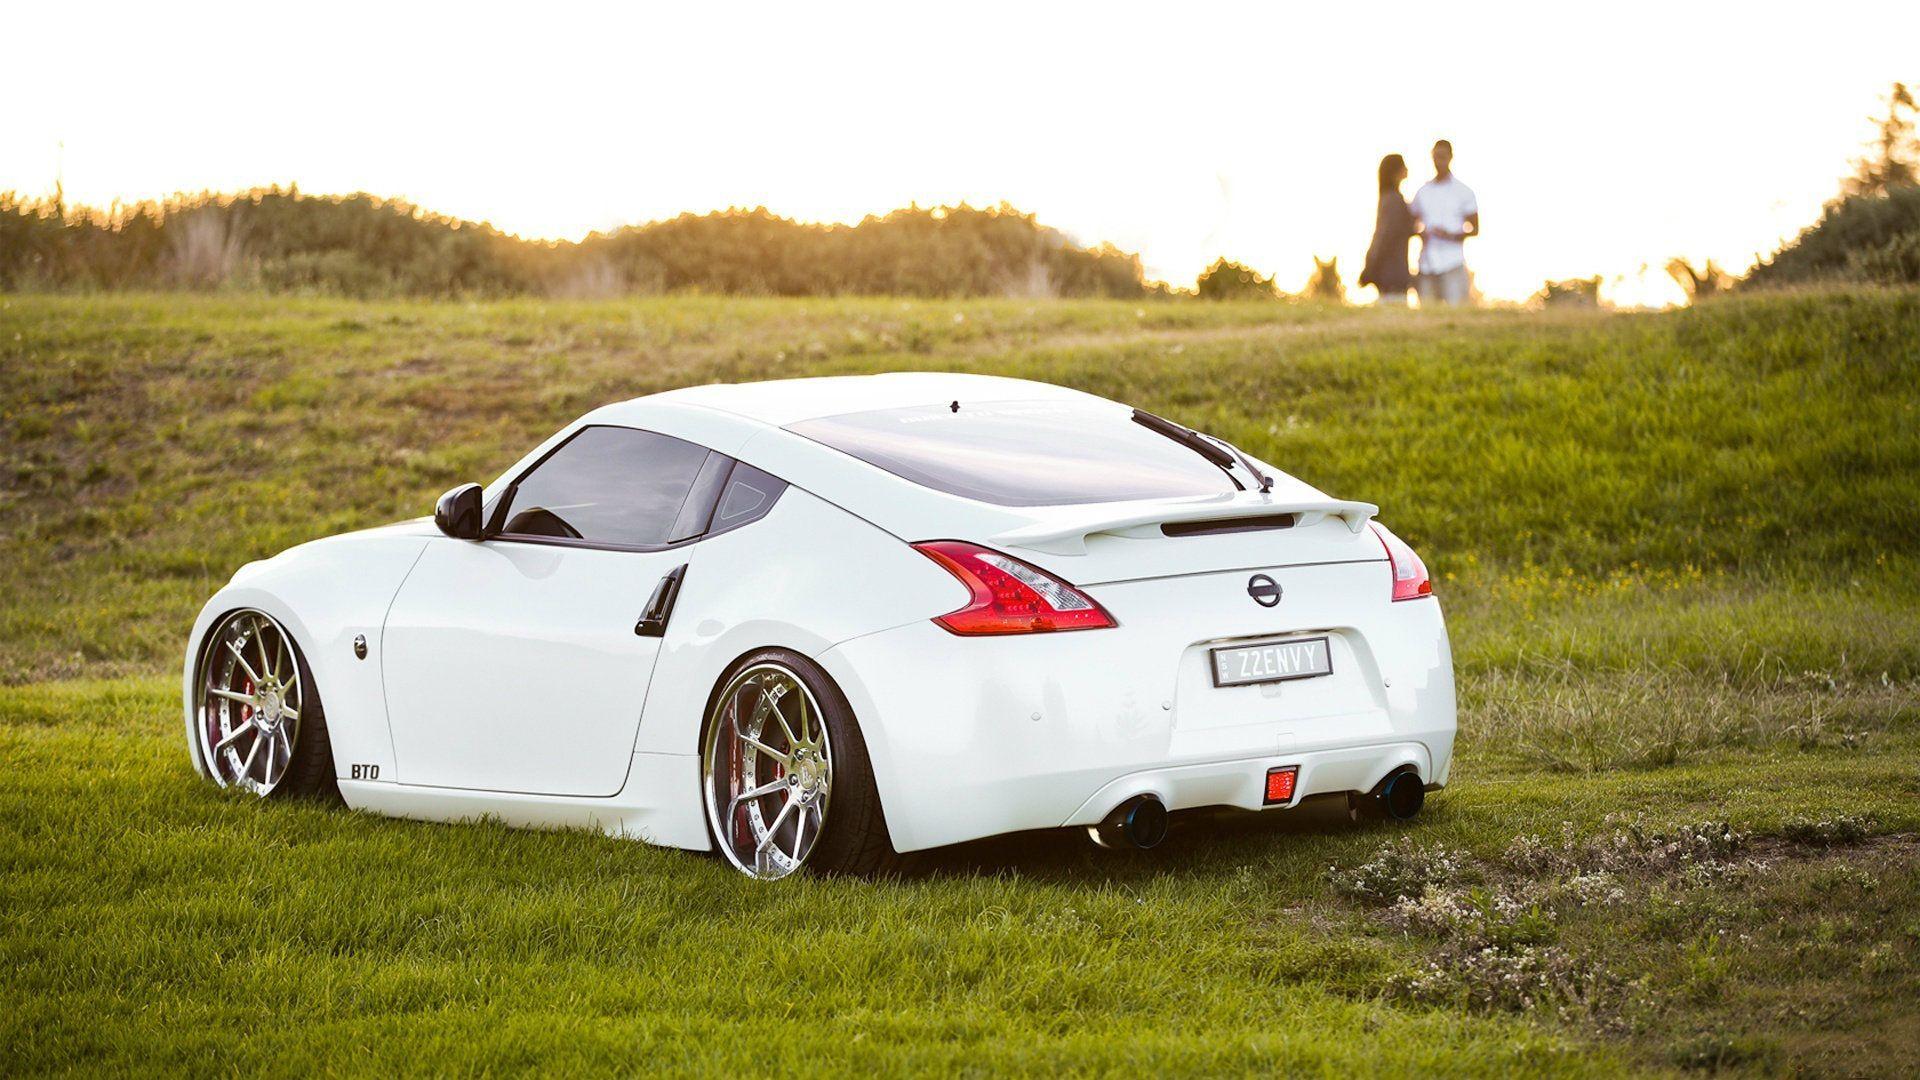 Picture Nissan 370Z Tuned Car Wallpaper, Image